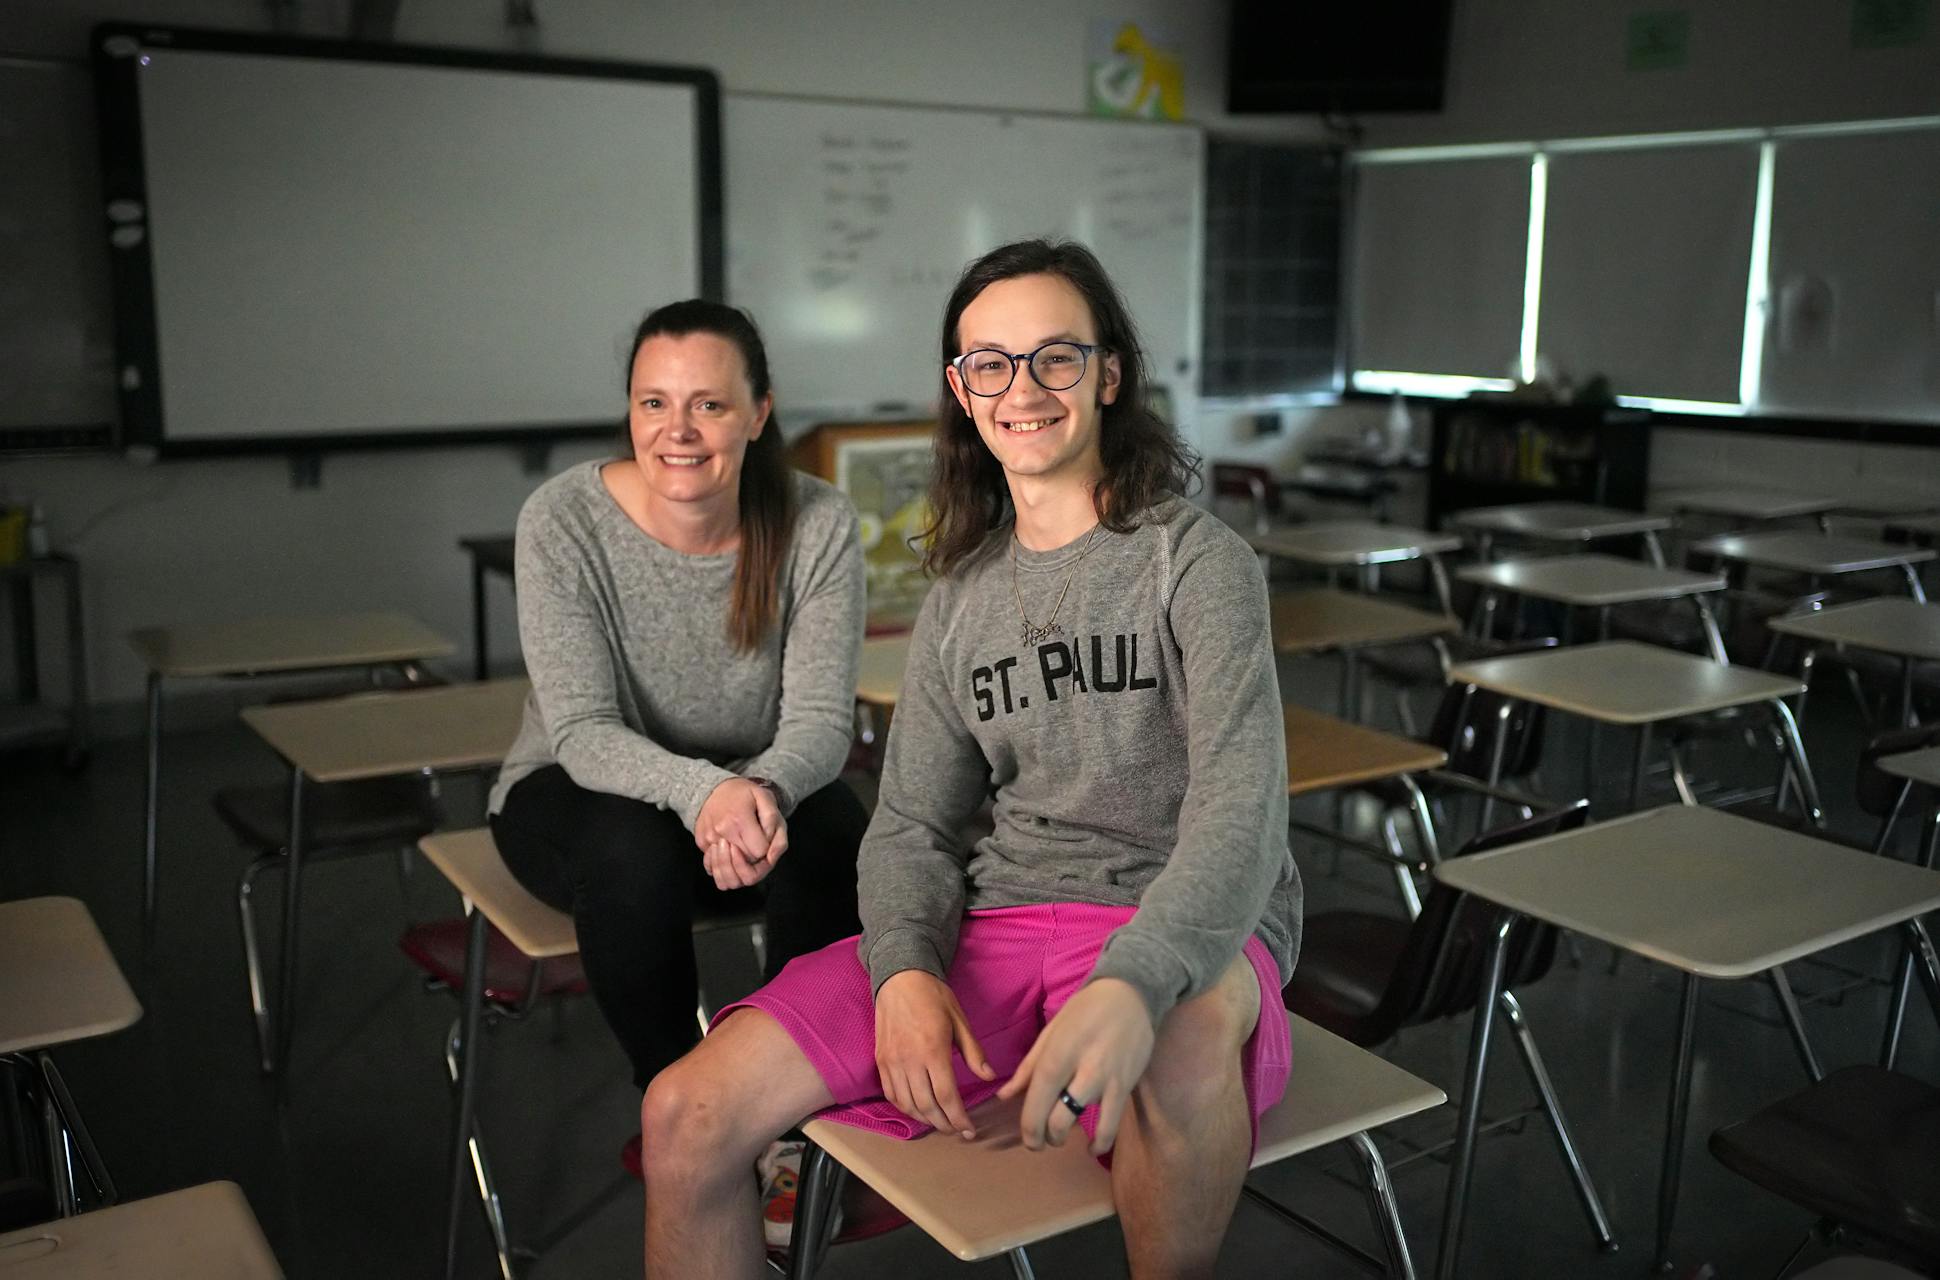 Harding High School Senior Max Rouillard-Horne with math team coach Shannon Pettipiece. Tuesday, May 24, 2022 in St. Paul, Minn. Graduating seniors thank the people who inspired them most this year. ] Brian Peterson ¥ brian.peterson@startribune.com